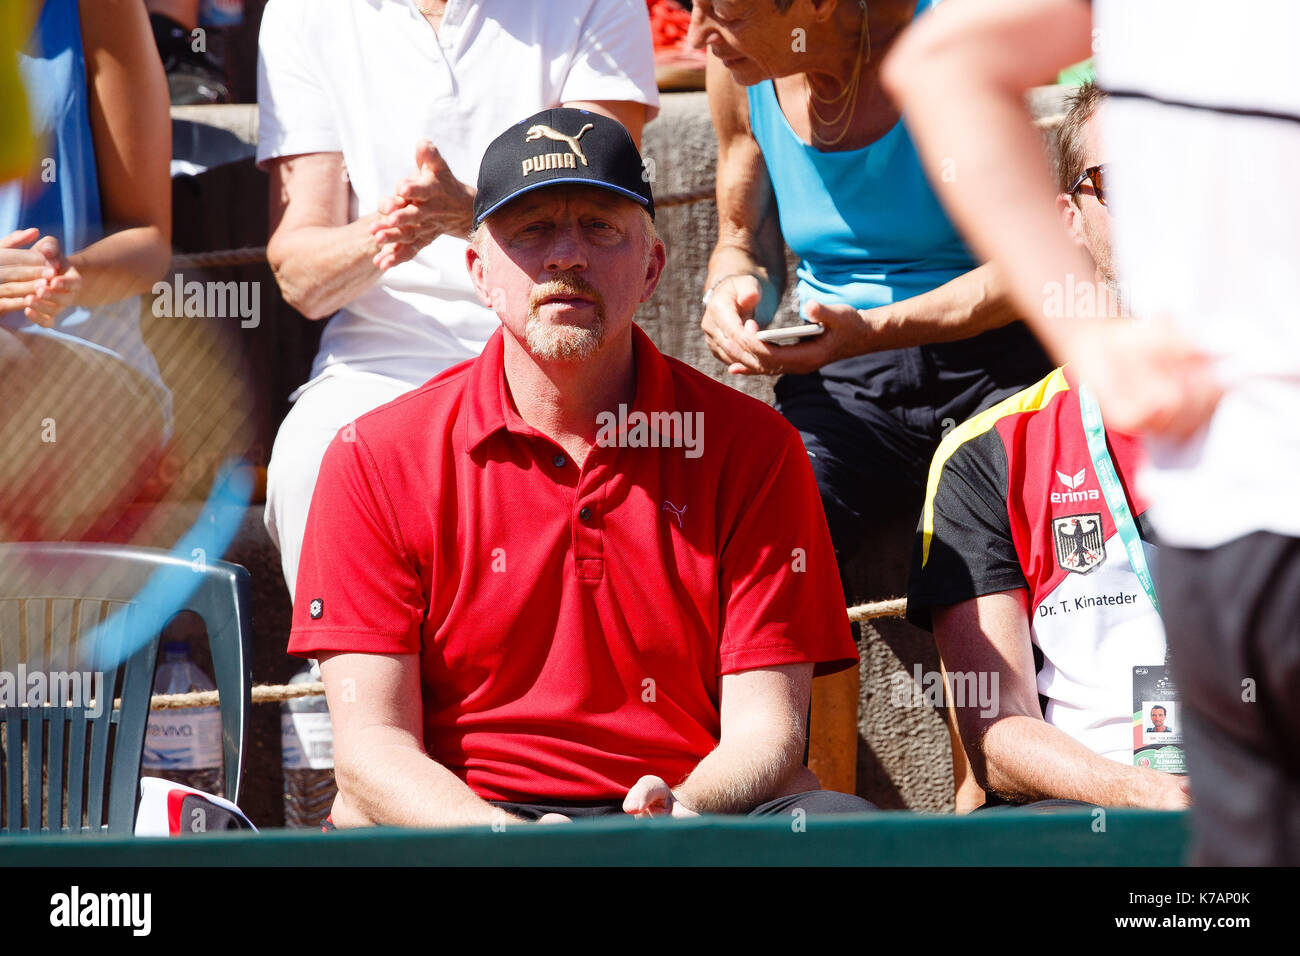 Oeiras, Portugal. 15th Sep, 2017. Germany's Head of men's tennis, Boris Becker, during the Davis Cup Play-Off match between Portugal and Germany at the Centro Desportivo Nacional Jamor in Oeiras/Lisbon. Credit: Frank Molter/Alamy Live News Stock Photo